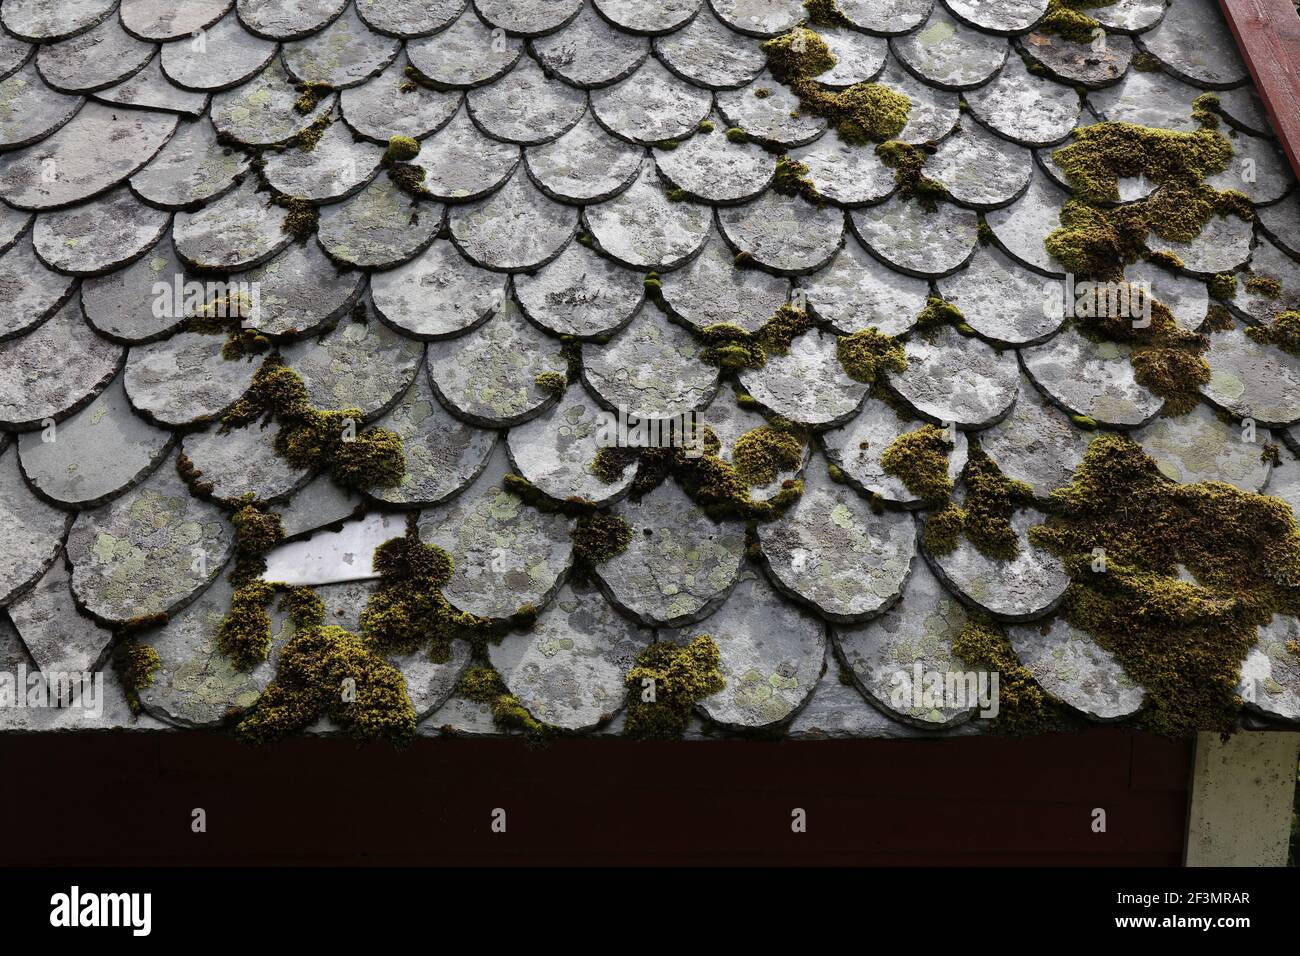 Norway traditional stone slate roof. Old stone slate tiles covered with moss and lichen. Norwegian architecture. Stock Photo